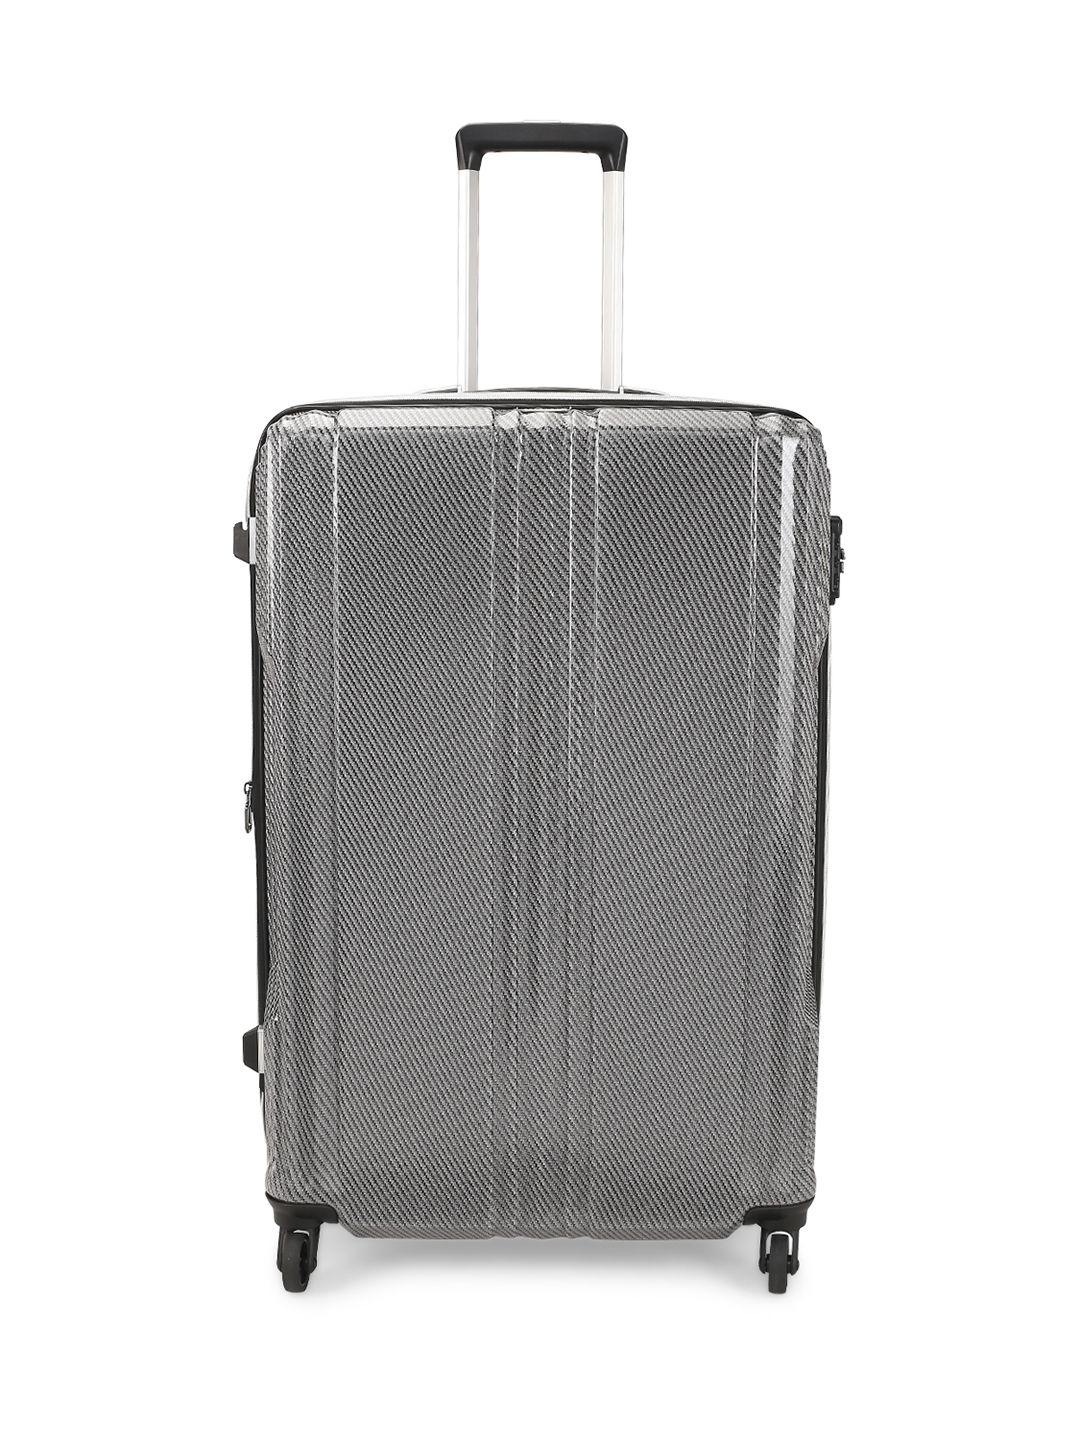 perquisite imperial series hard-sided 71.12cm large trolley bag